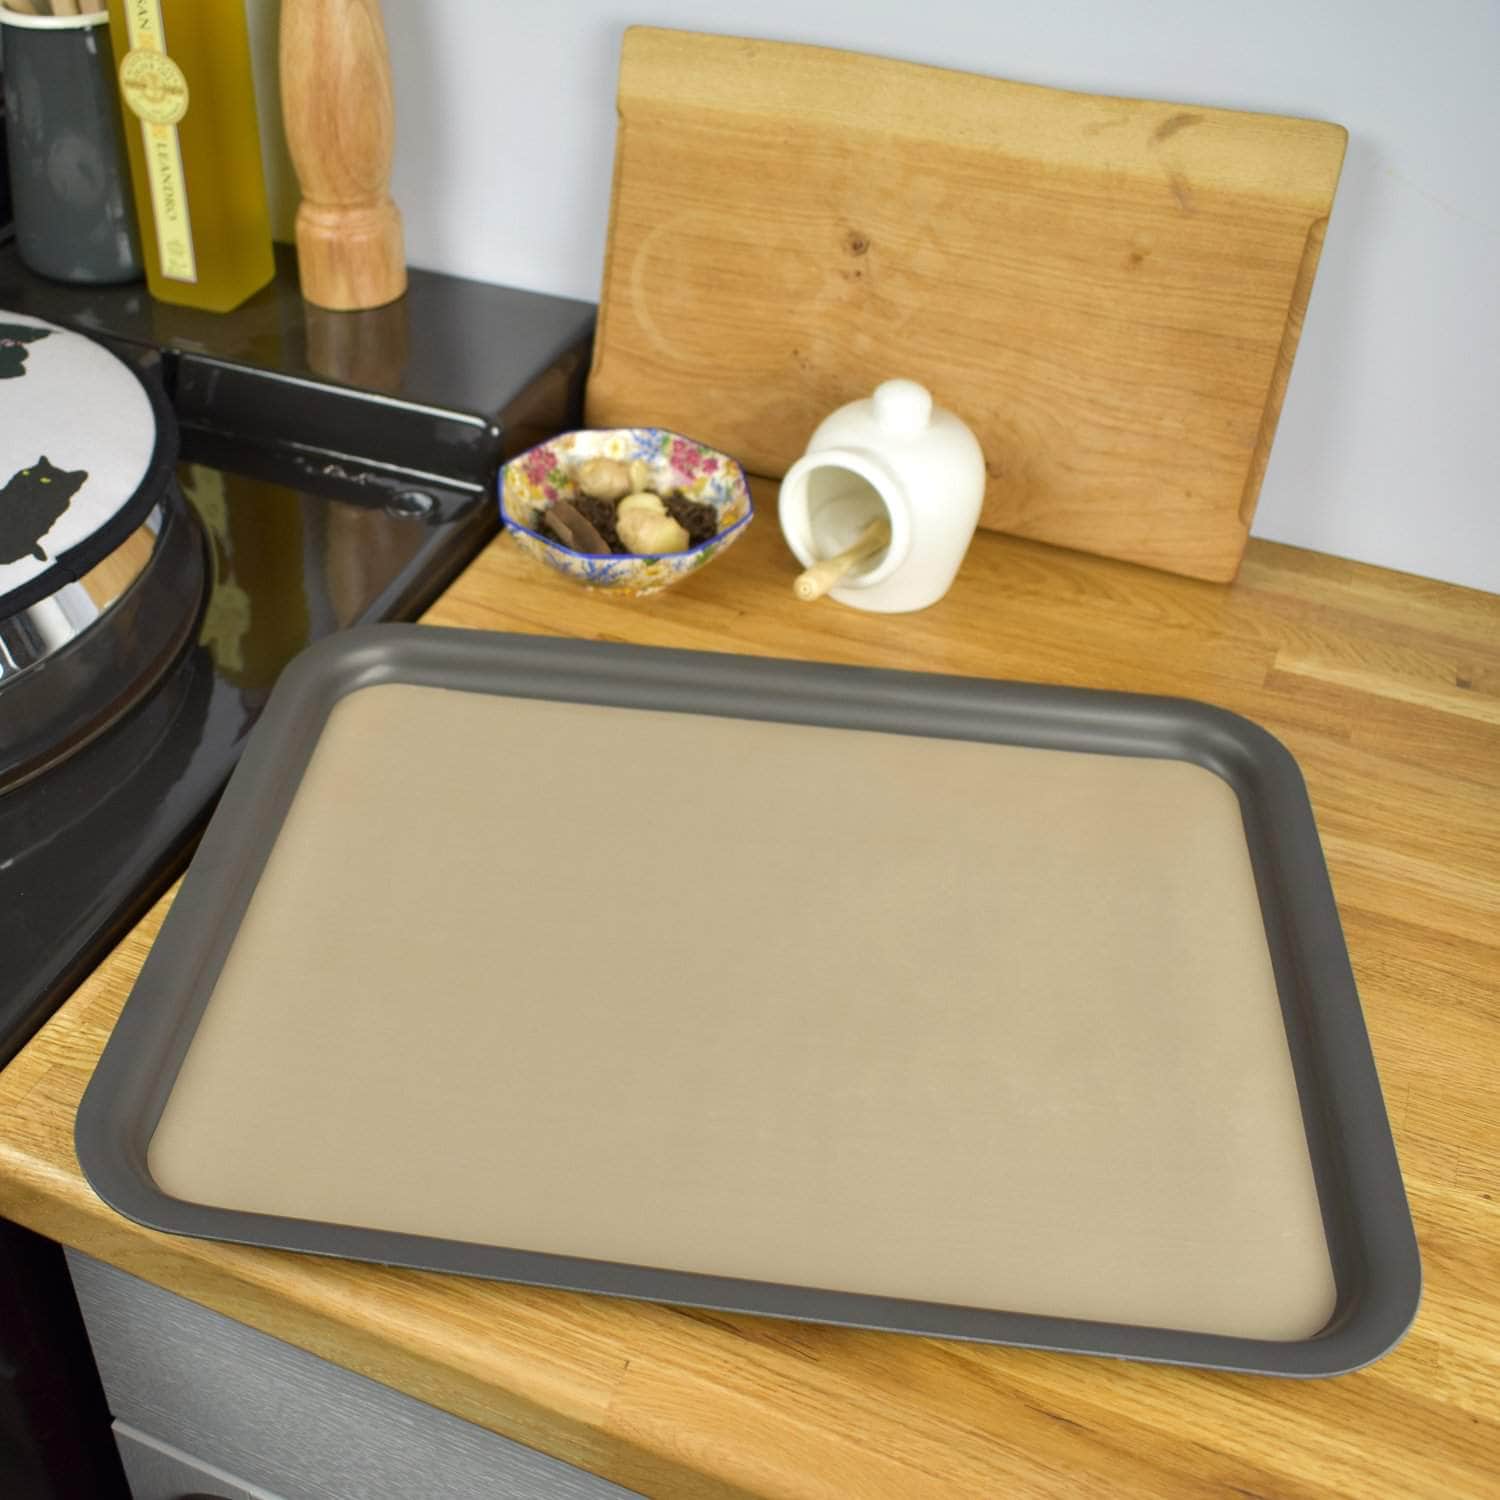 Non-stick liner for 'full oven' size baking tray or cold shelf